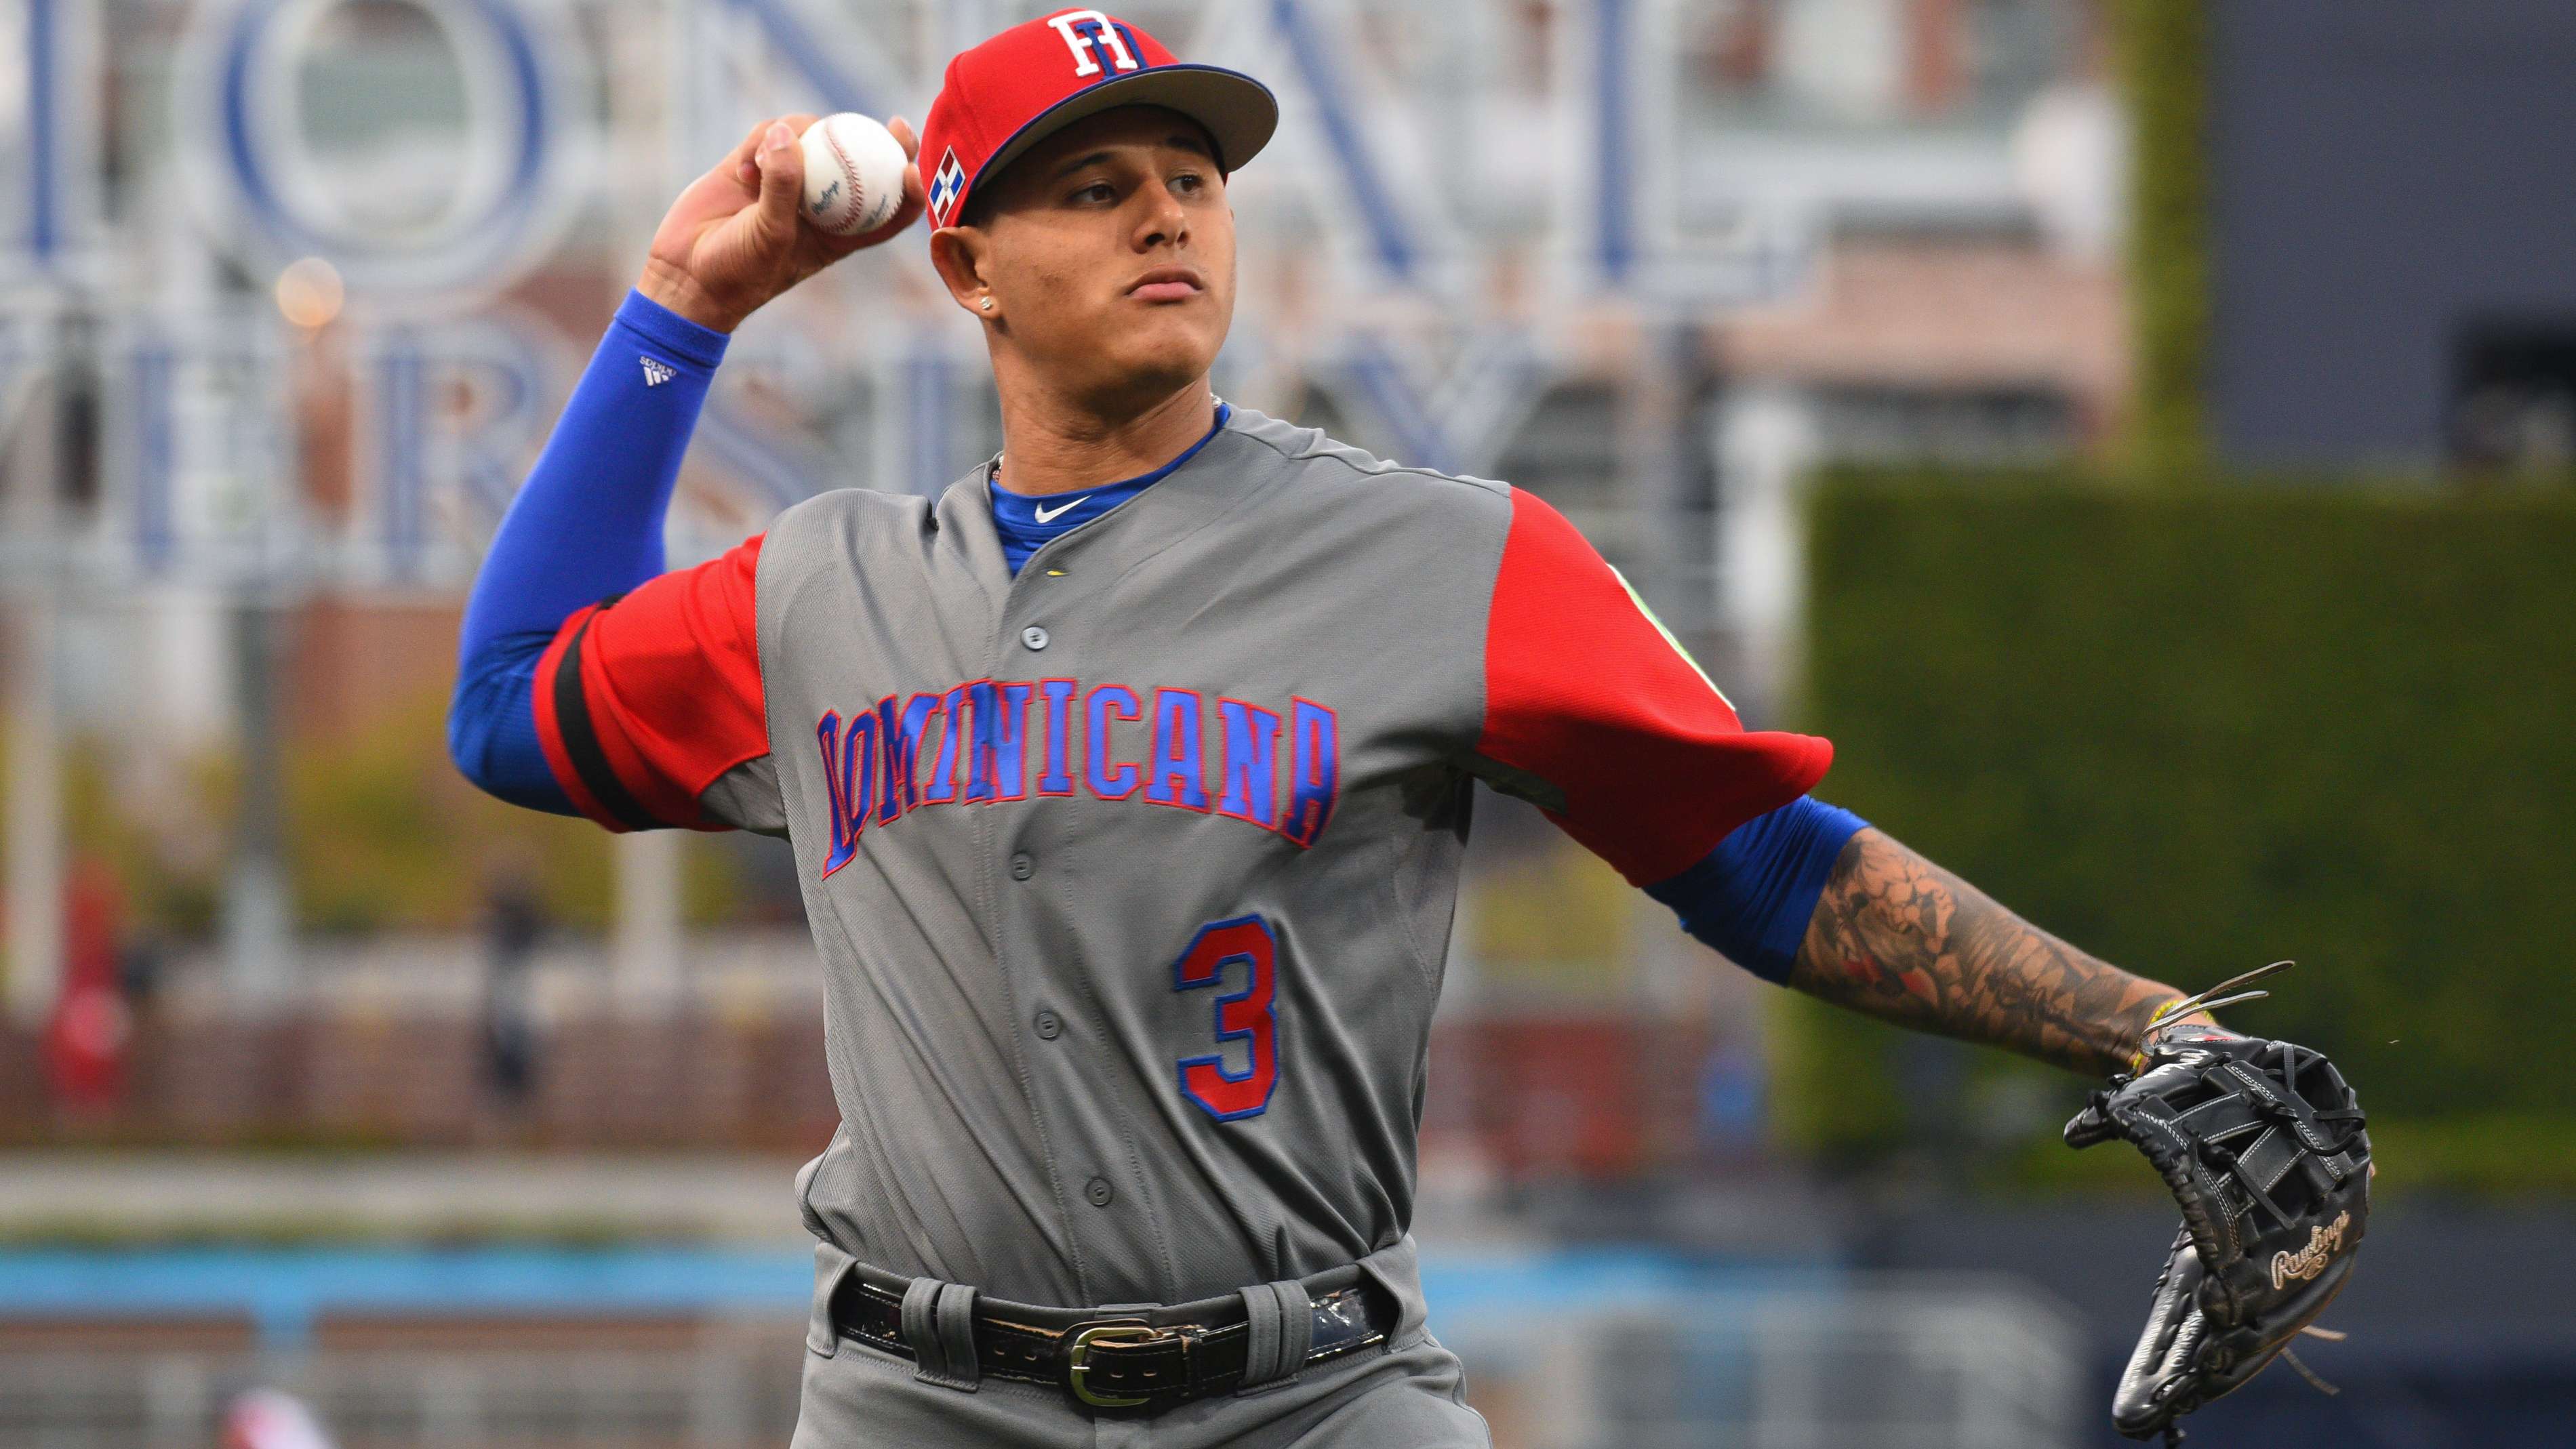 The Dominican Republic's World Baseball Classic roster for 2023